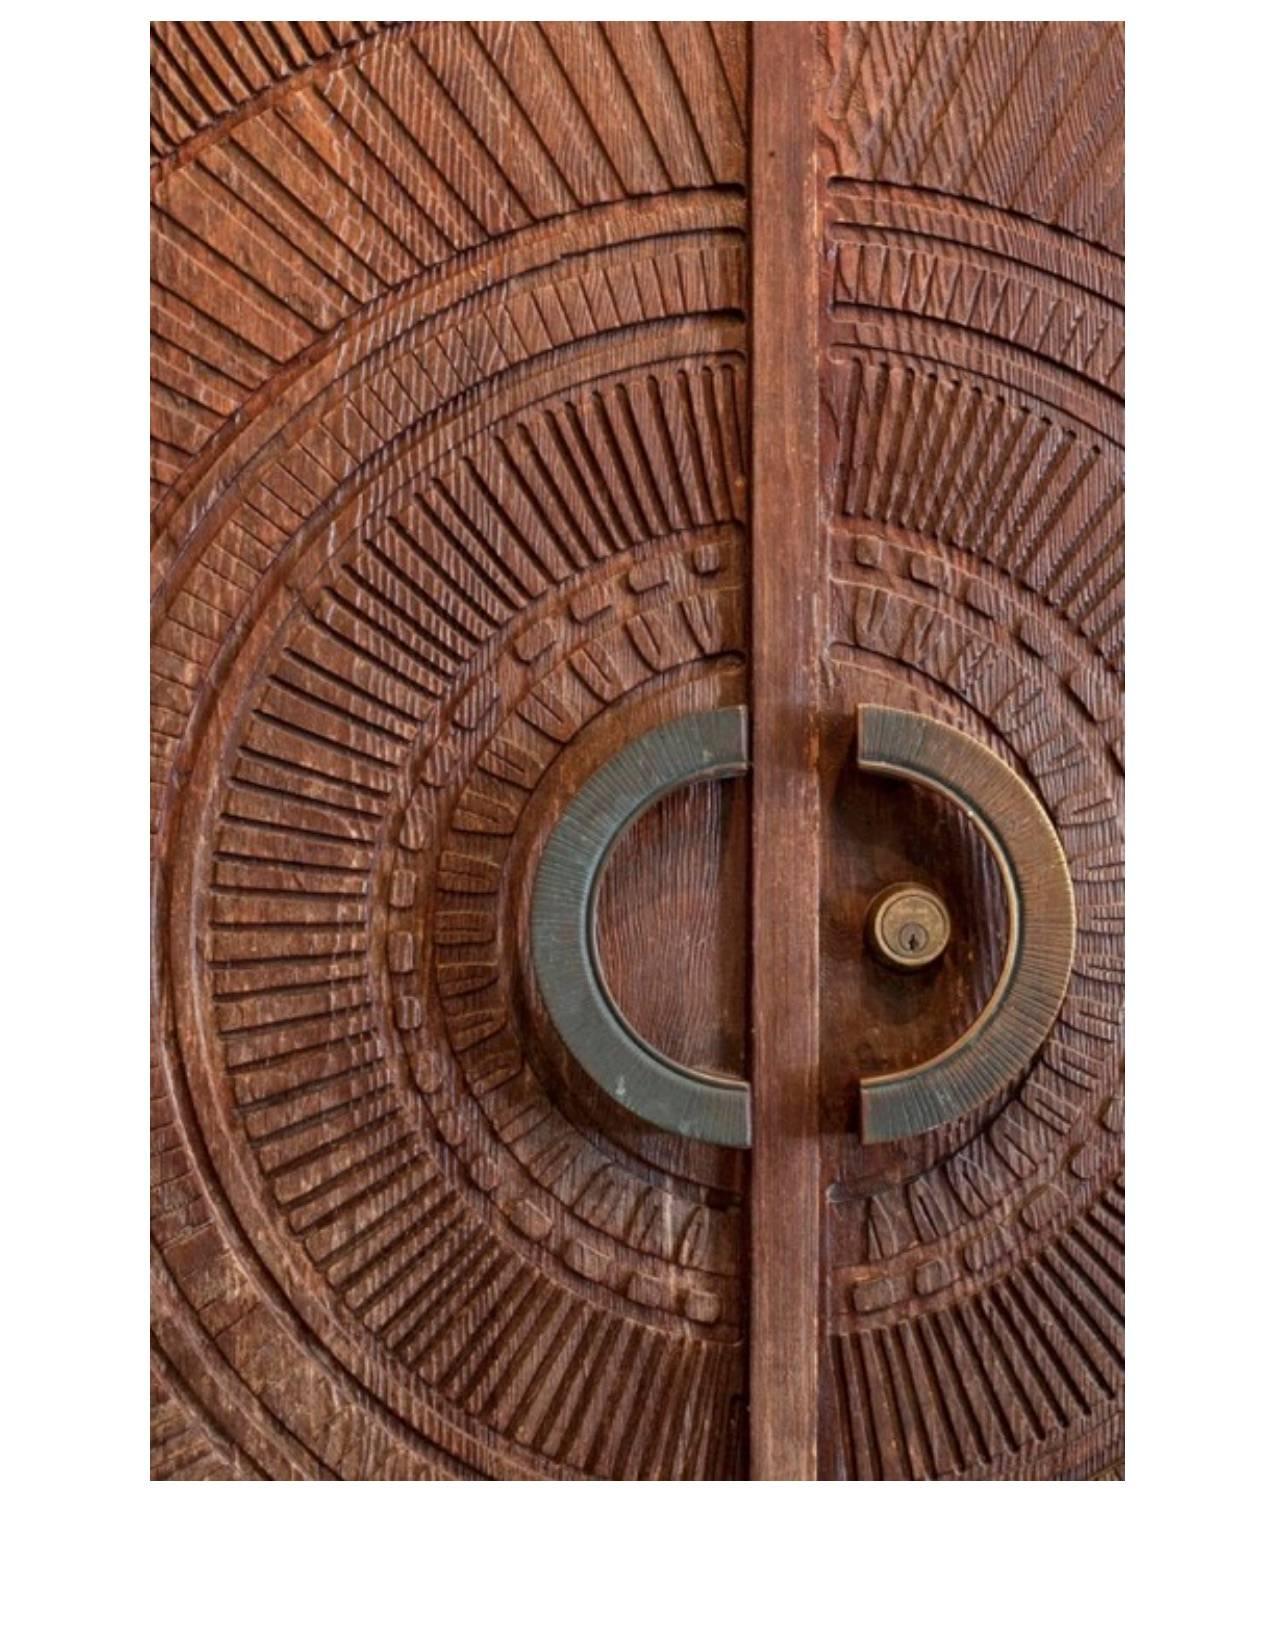 Magnificent double sunburst doors by Billy Joe McCarroll and David Gillespe, USA, circa 1970s. “Exterior” side in carved and impressed 2″ thick redwood in a radiant sunburst pattern adorn both sides of these doors. “Interior” side ebonized with